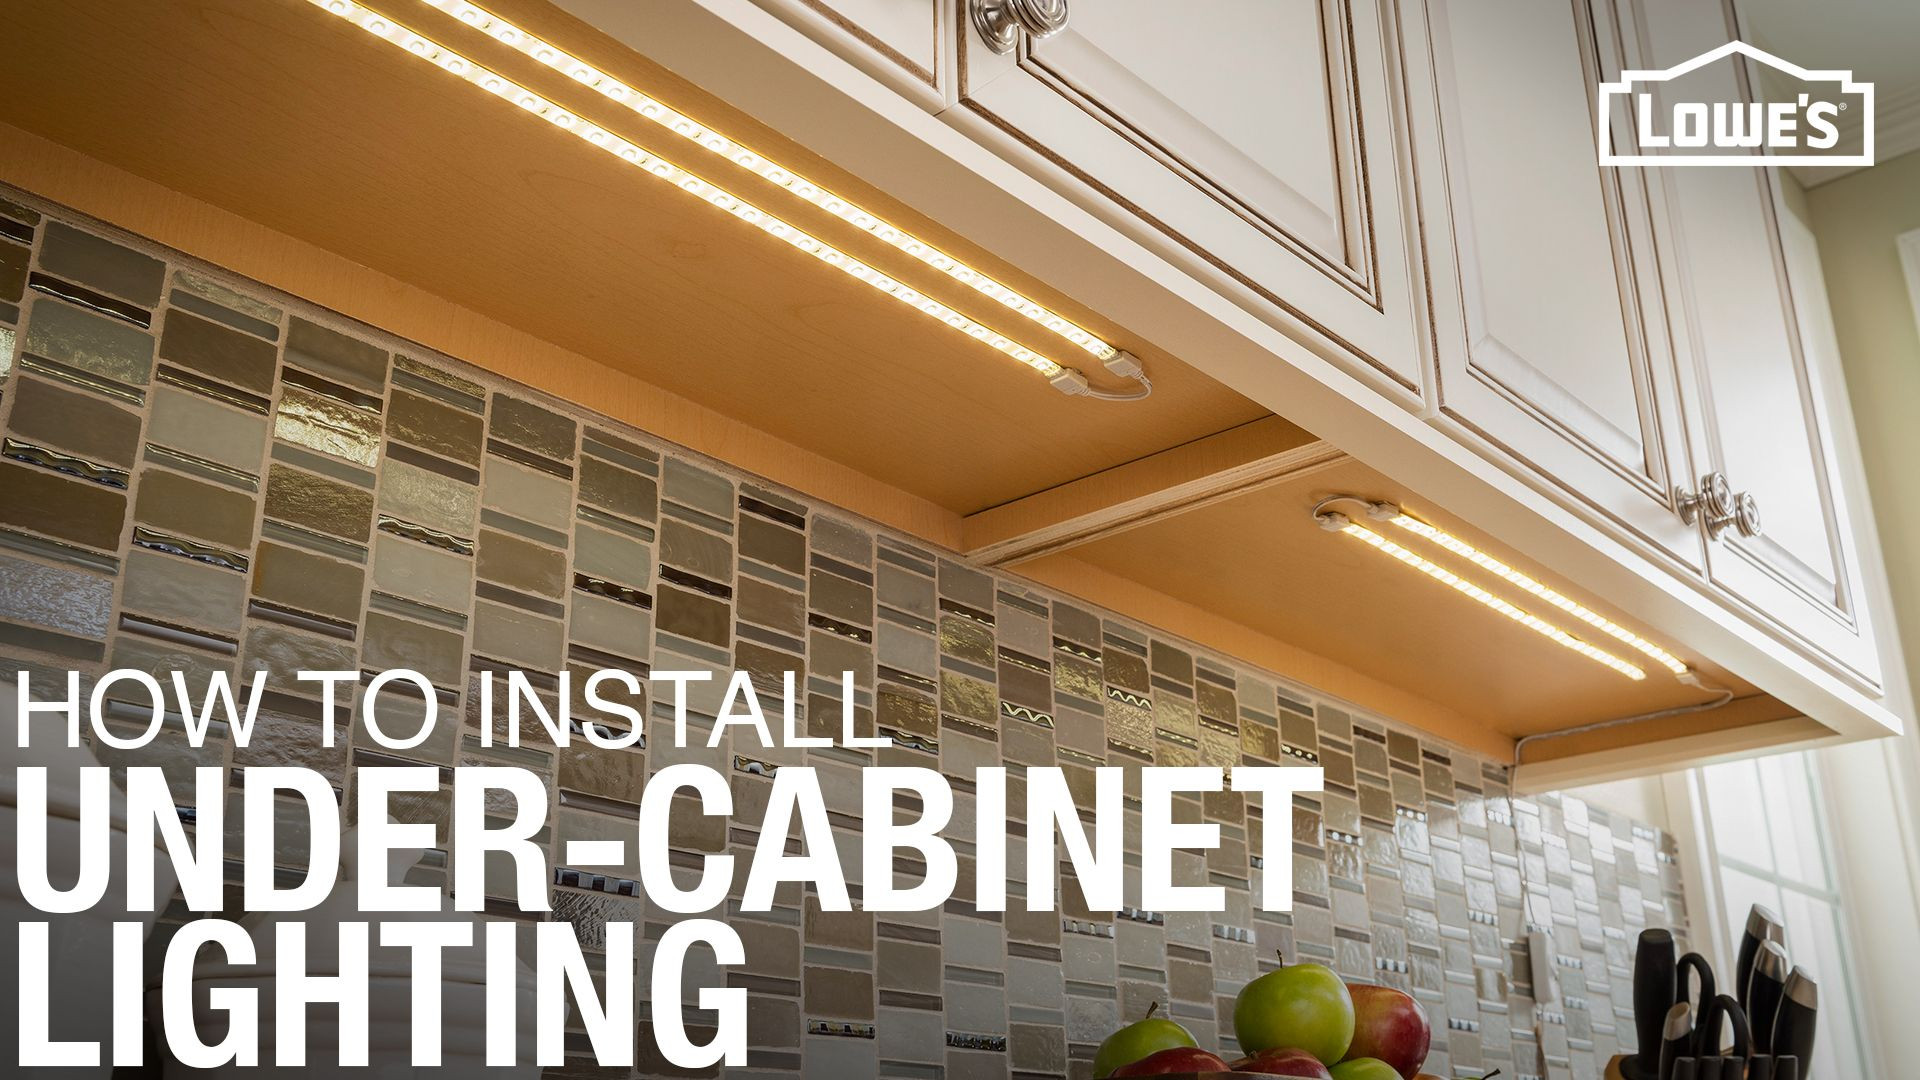 Kitchen Under Cabinet Lighting Options
 How to Install Under Cabinet Lighting